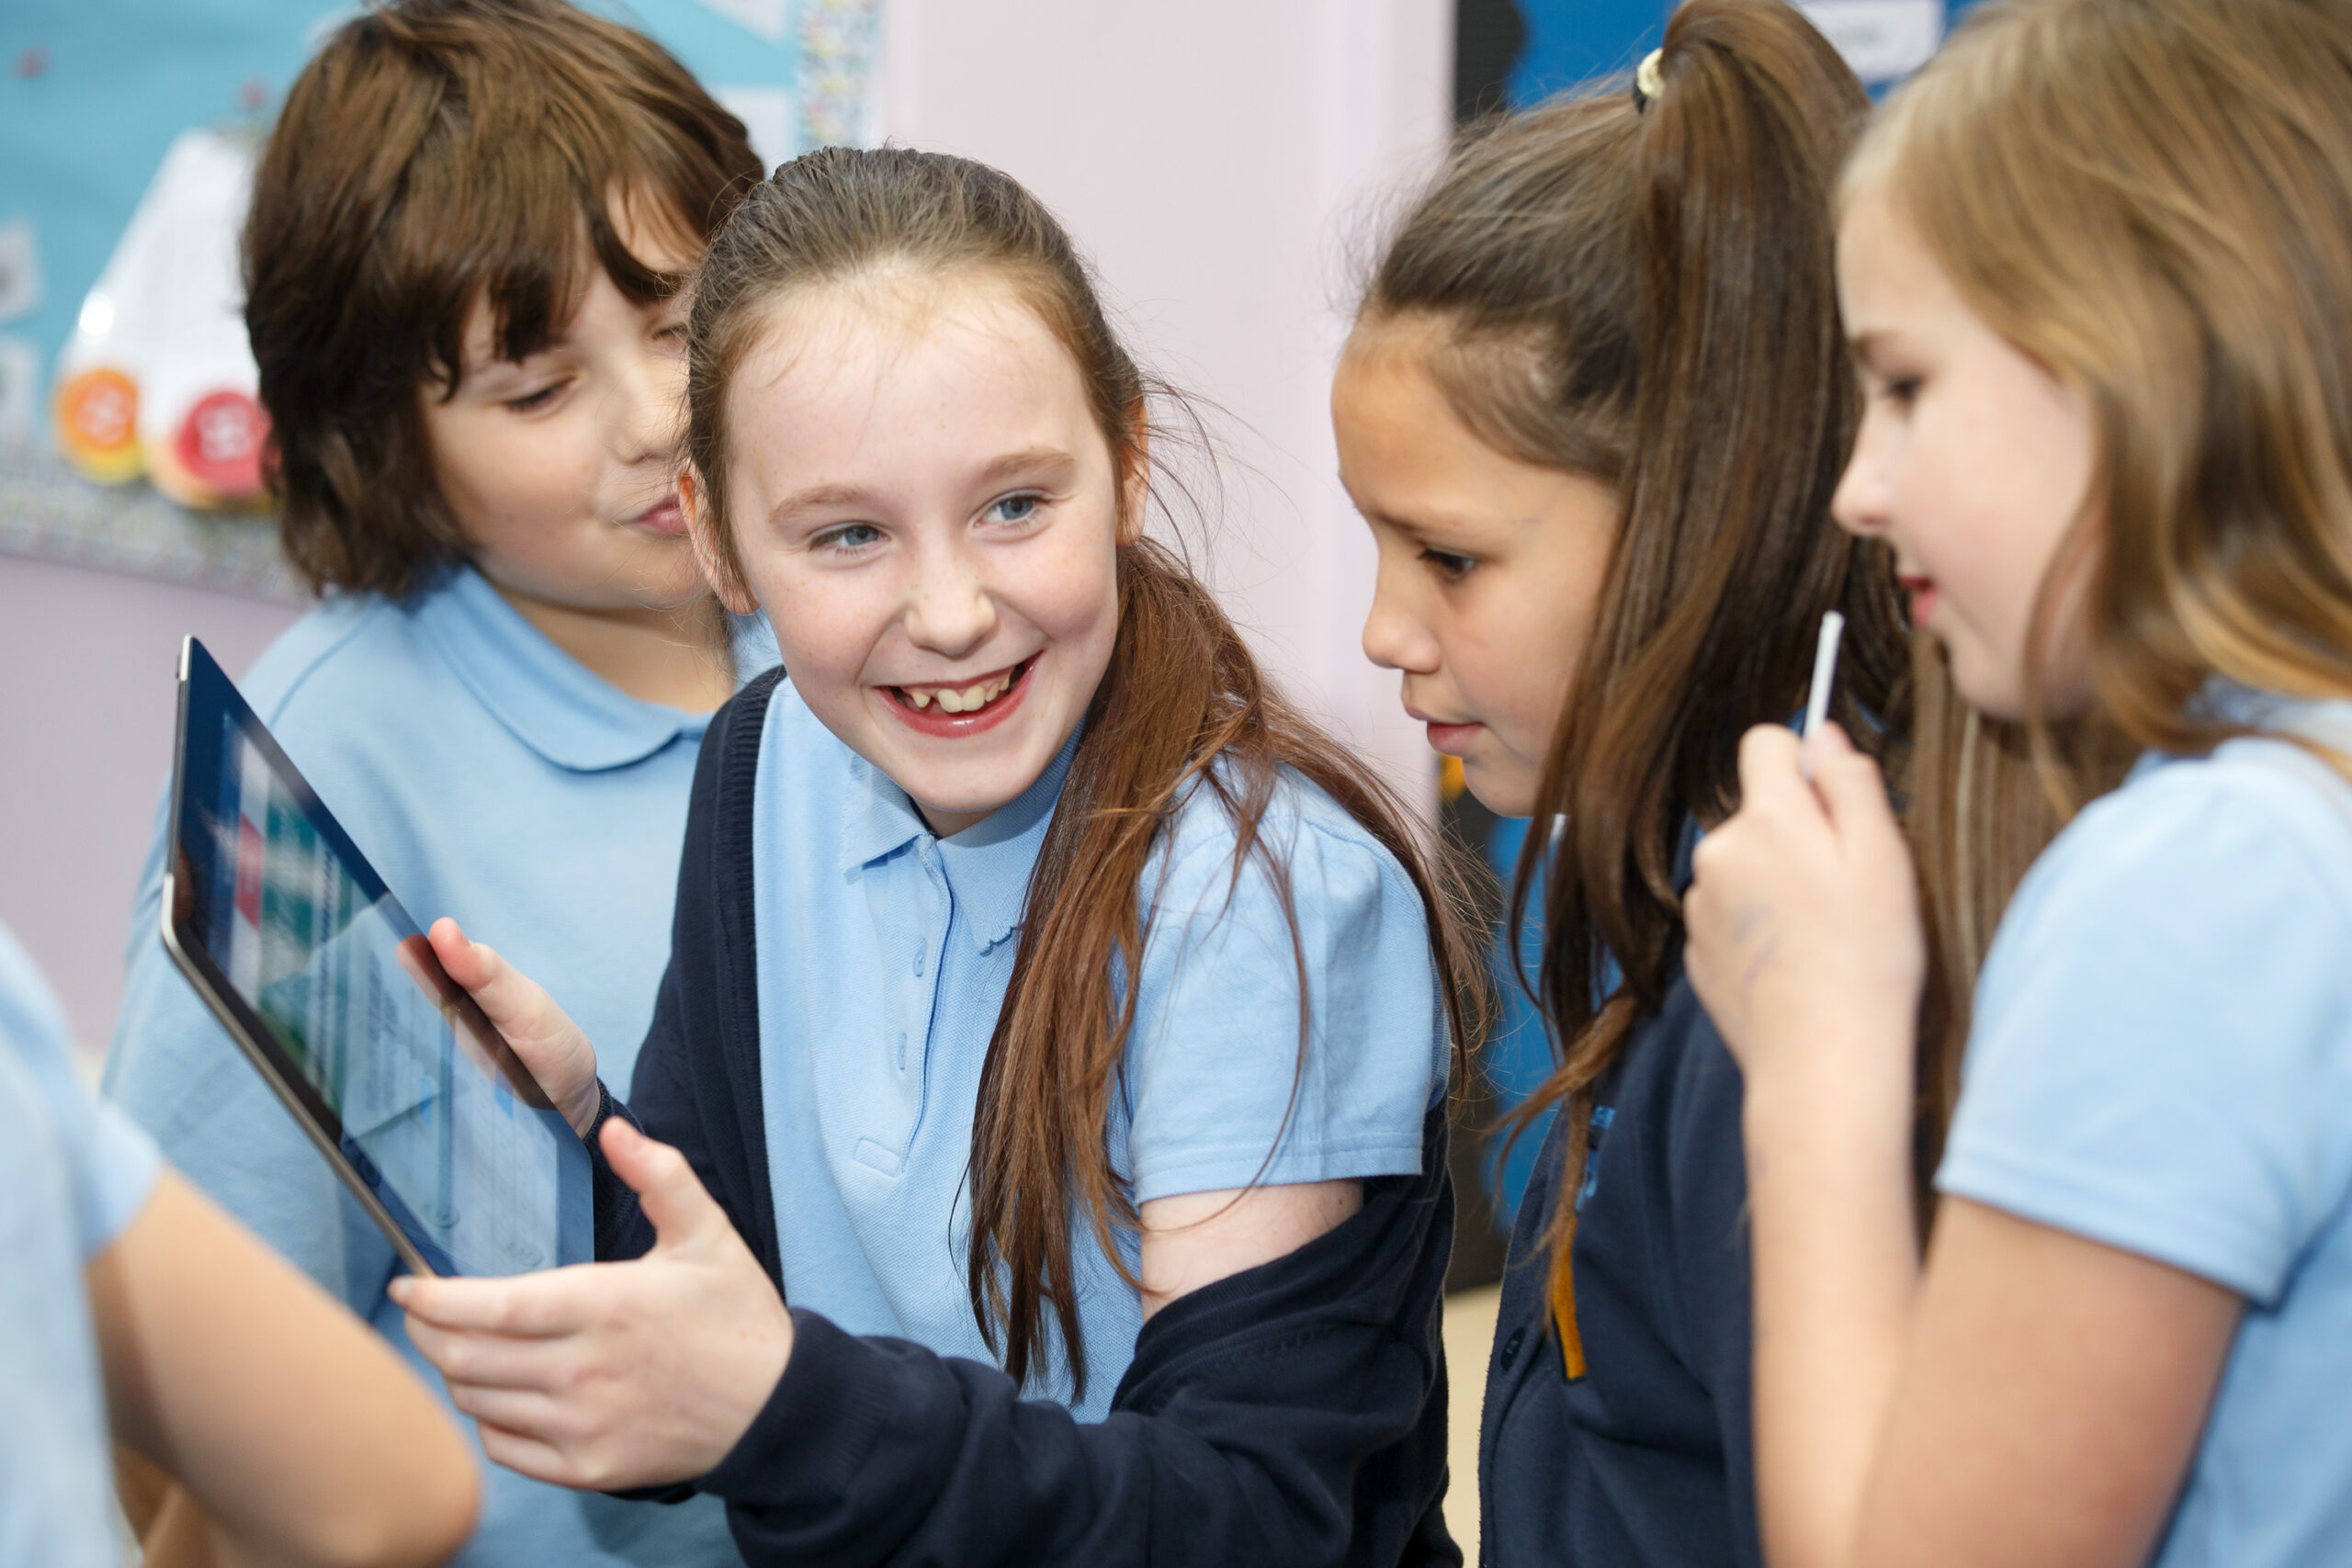 A photograph of four primary school children smiling while interacting with a tablet device